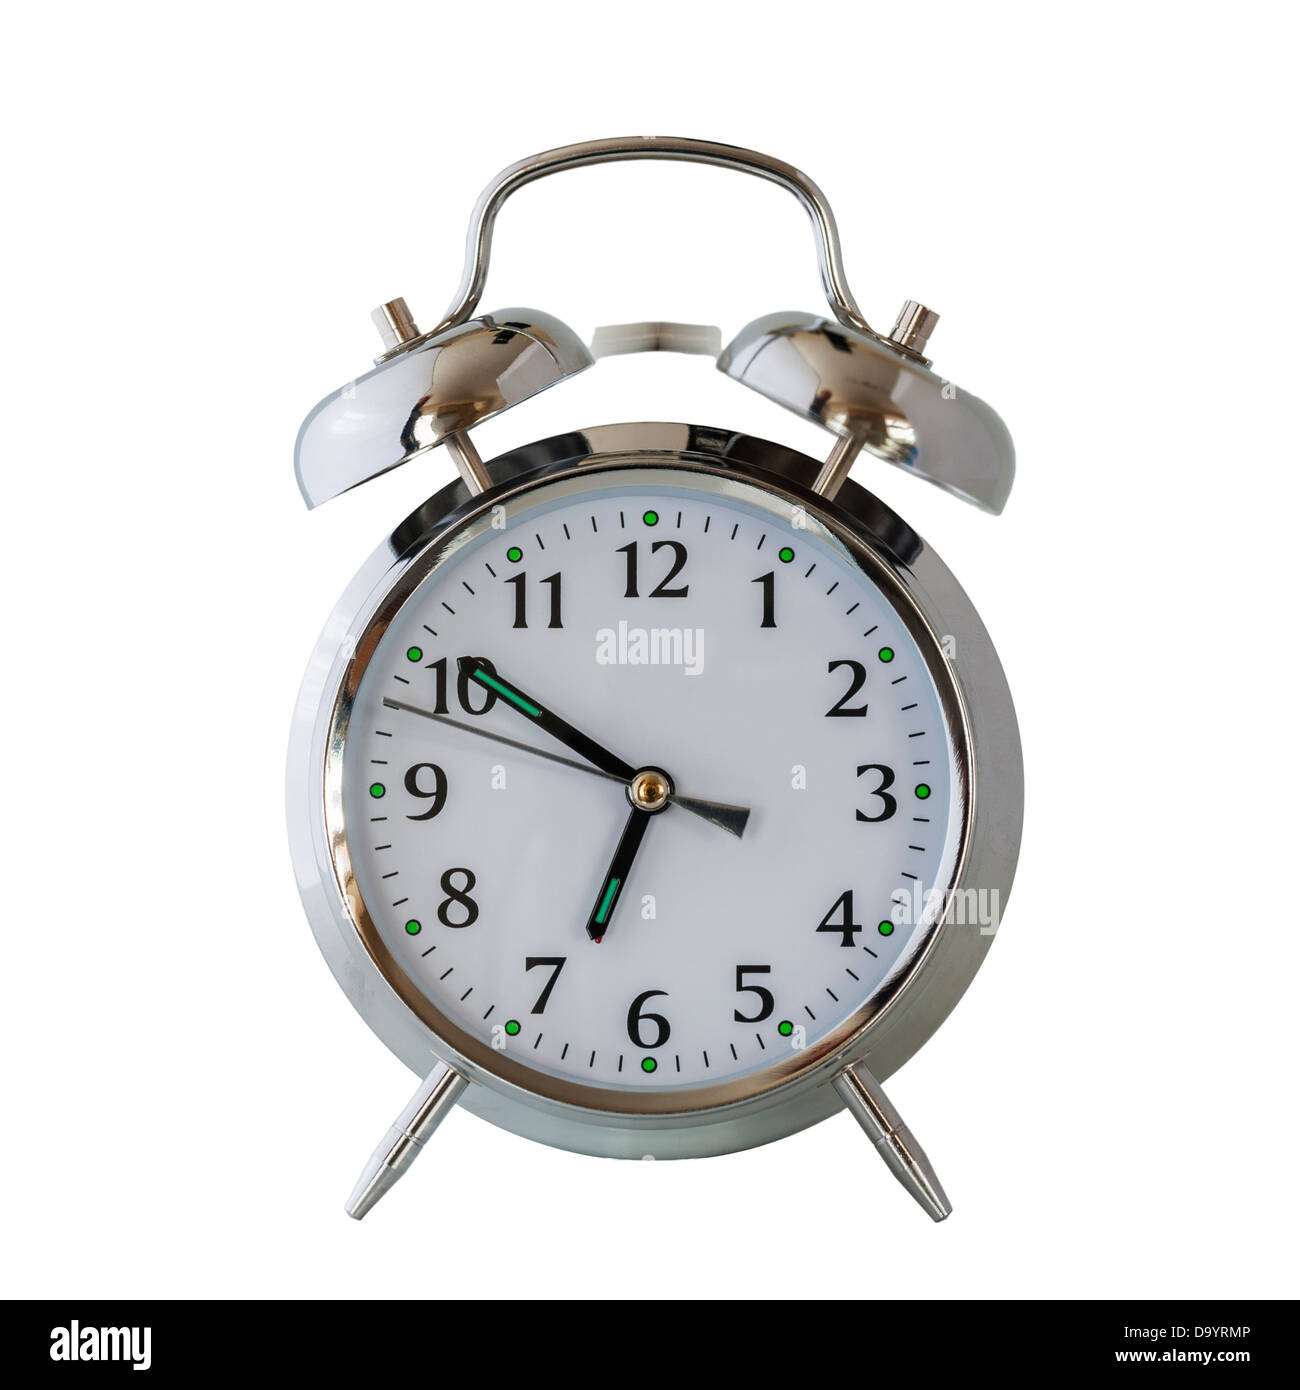 A classic alarm clock with the hammer showing movement as it rings the bells on a white background Stock Photo